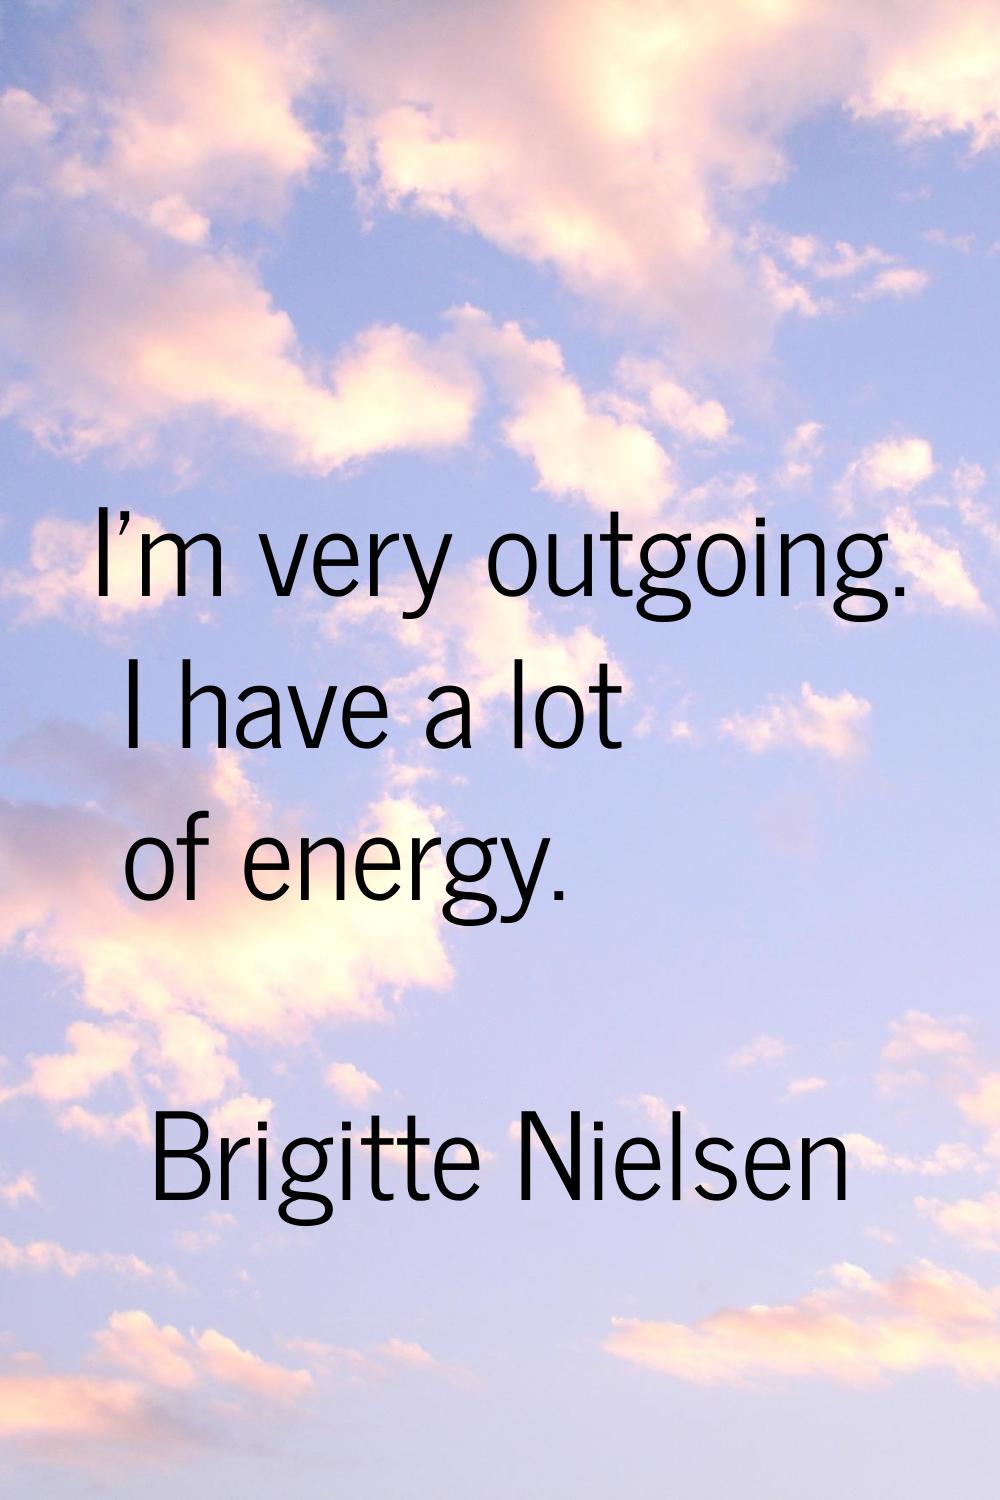 I'm very outgoing. I have a lot of energy.